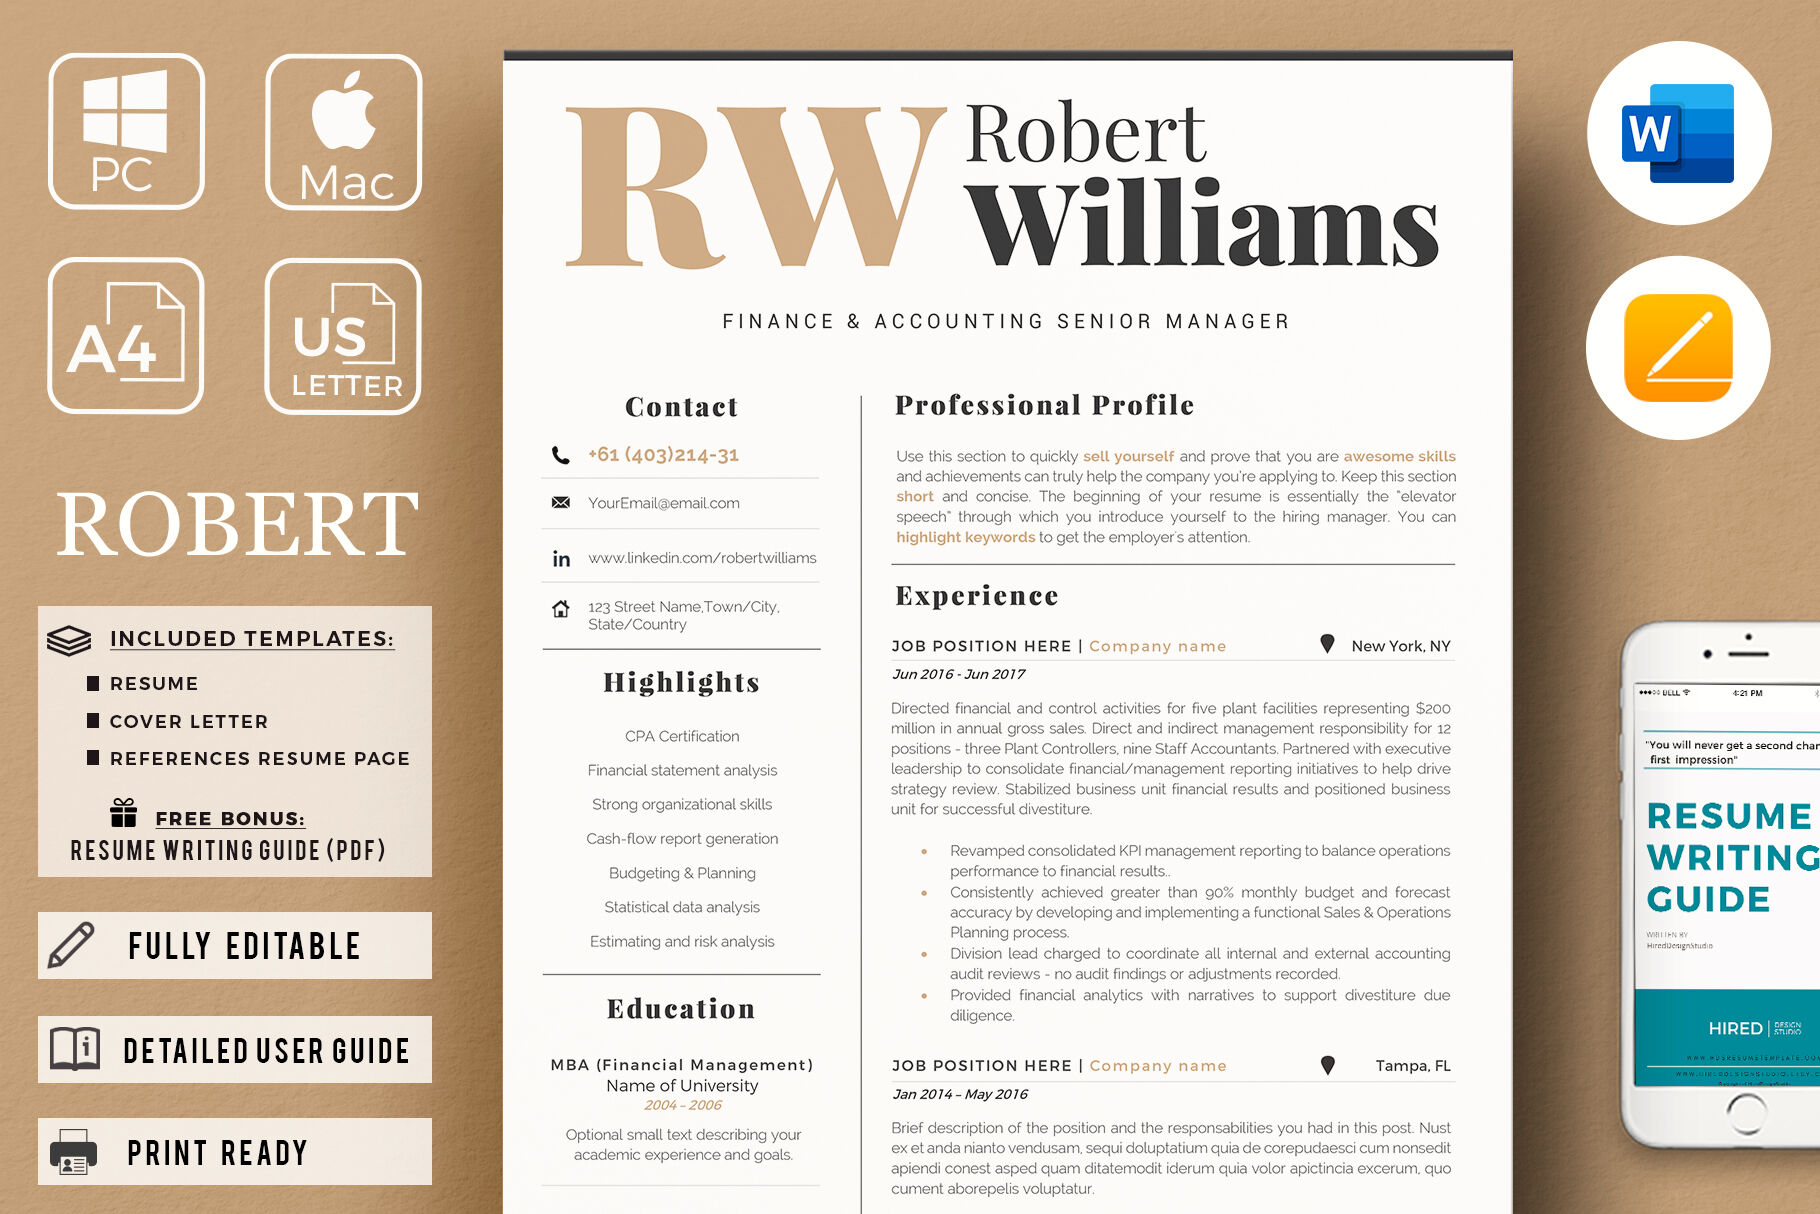 3 Page Resume Template Cover Letter References By Hiredds Thehungryjpeg Com